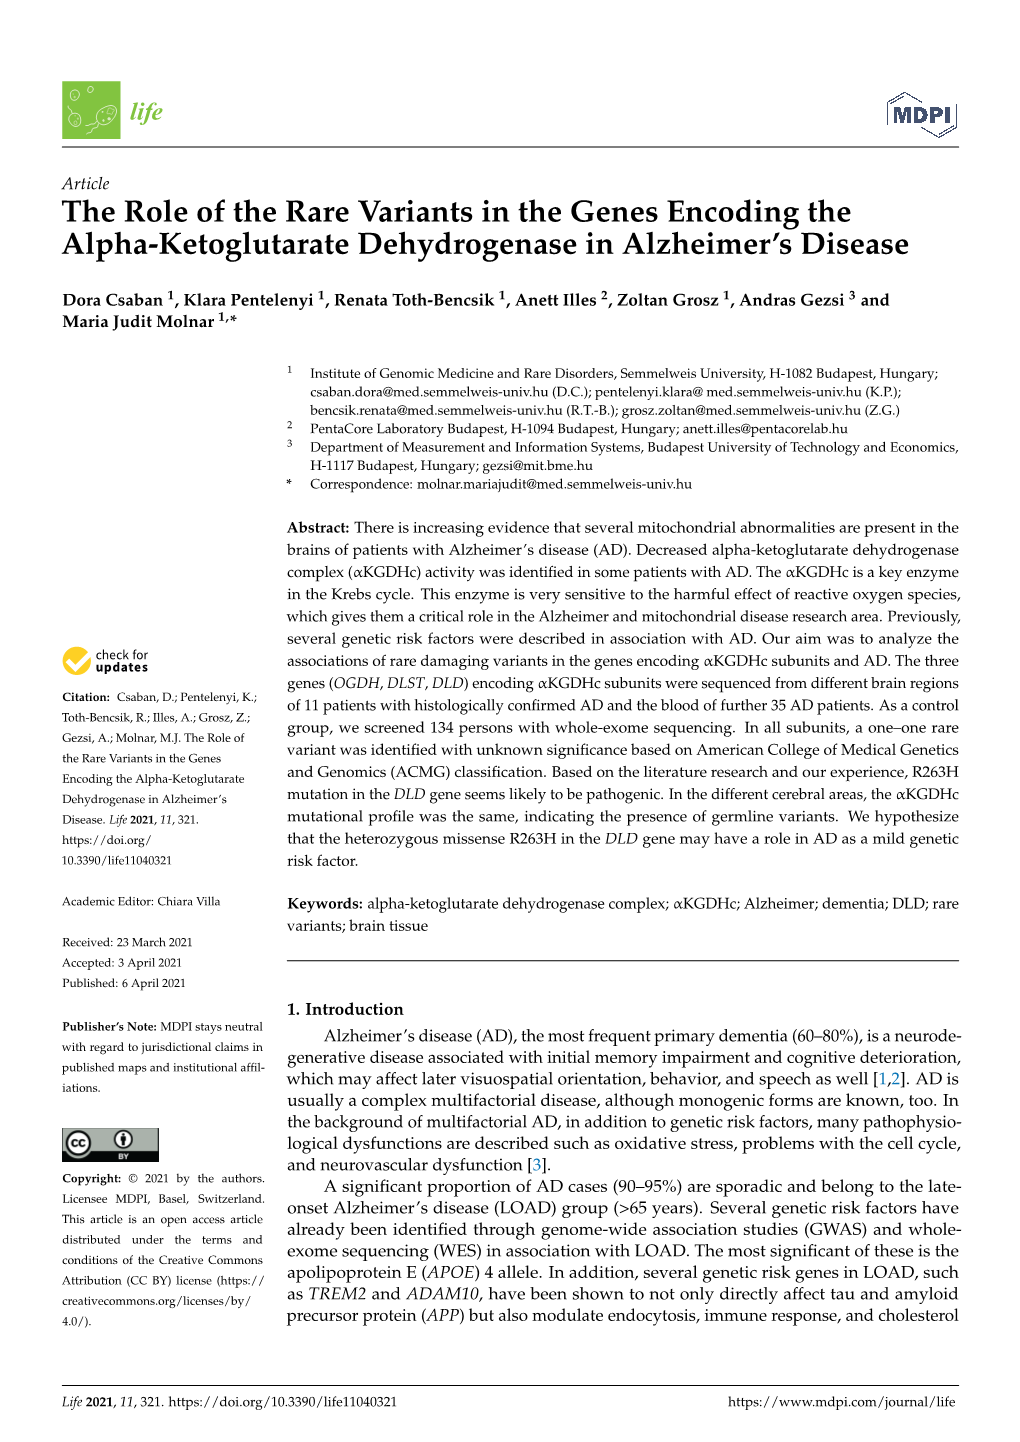 The Role of the Rare Variants in the Genes Encoding the Alpha-Ketoglutarate Dehydrogenase in Alzheimer’S Disease